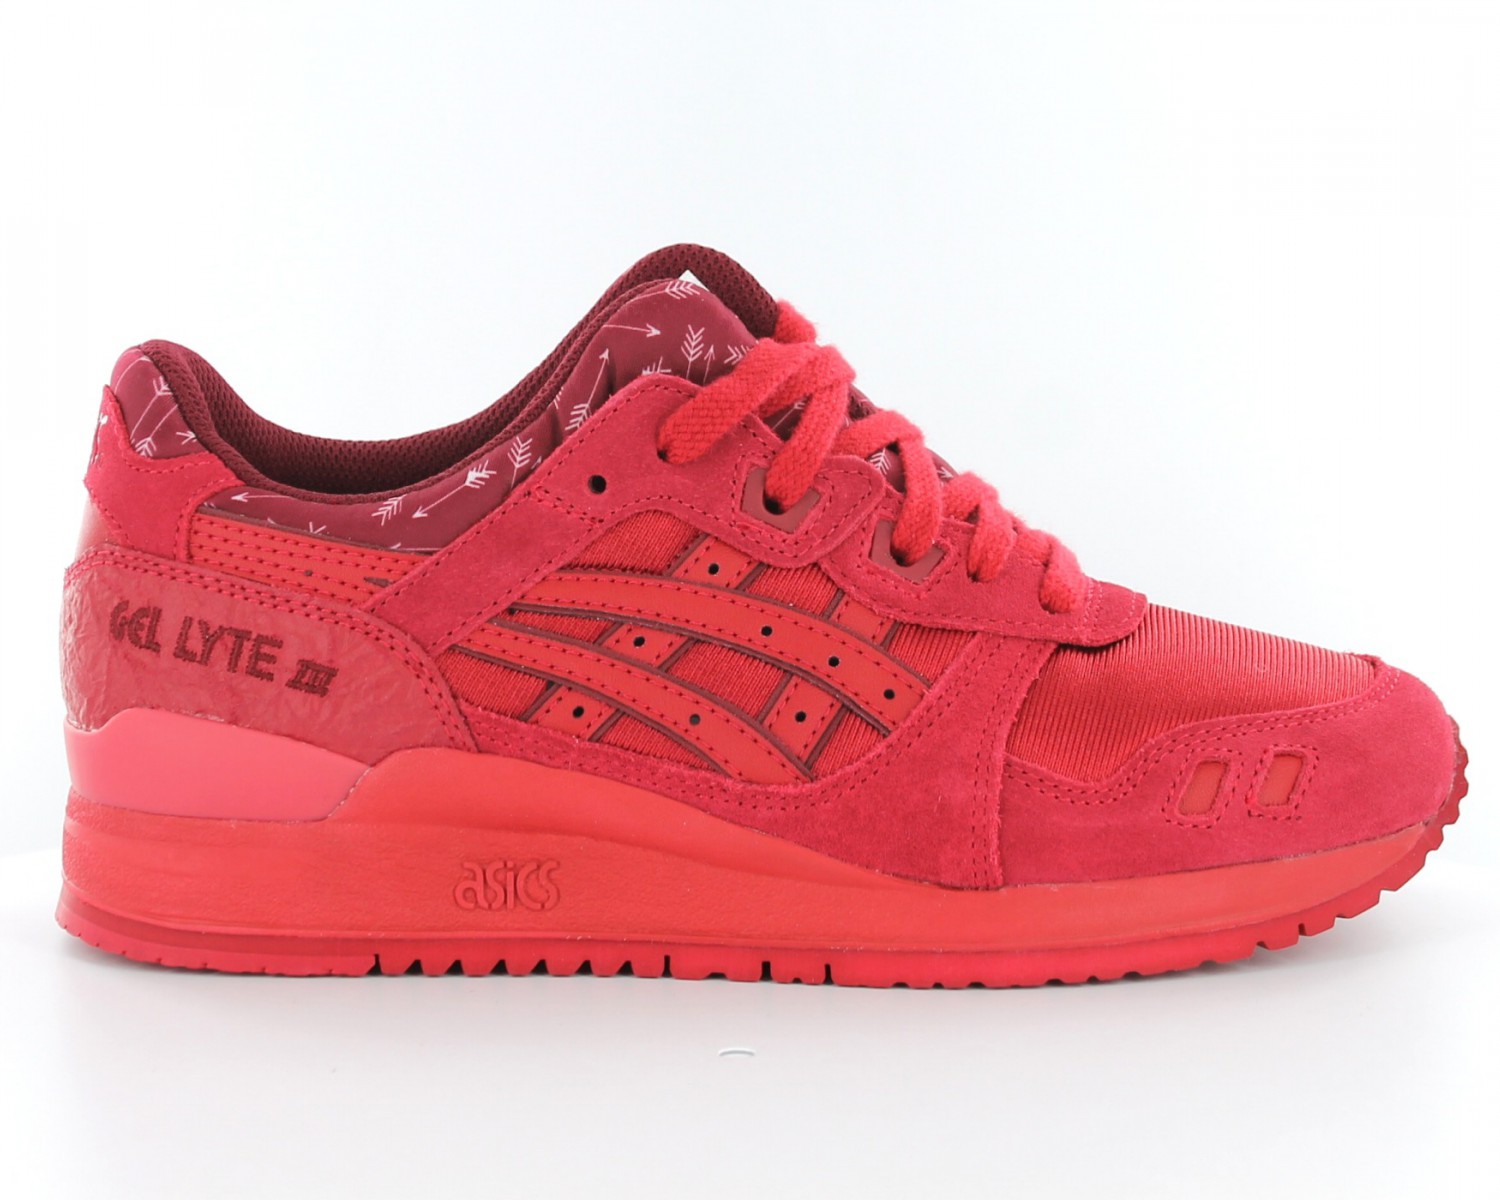 Pericia barajar Camello Asics Gel lyte 3 valentine's day rouge ROUGE/ROUGE